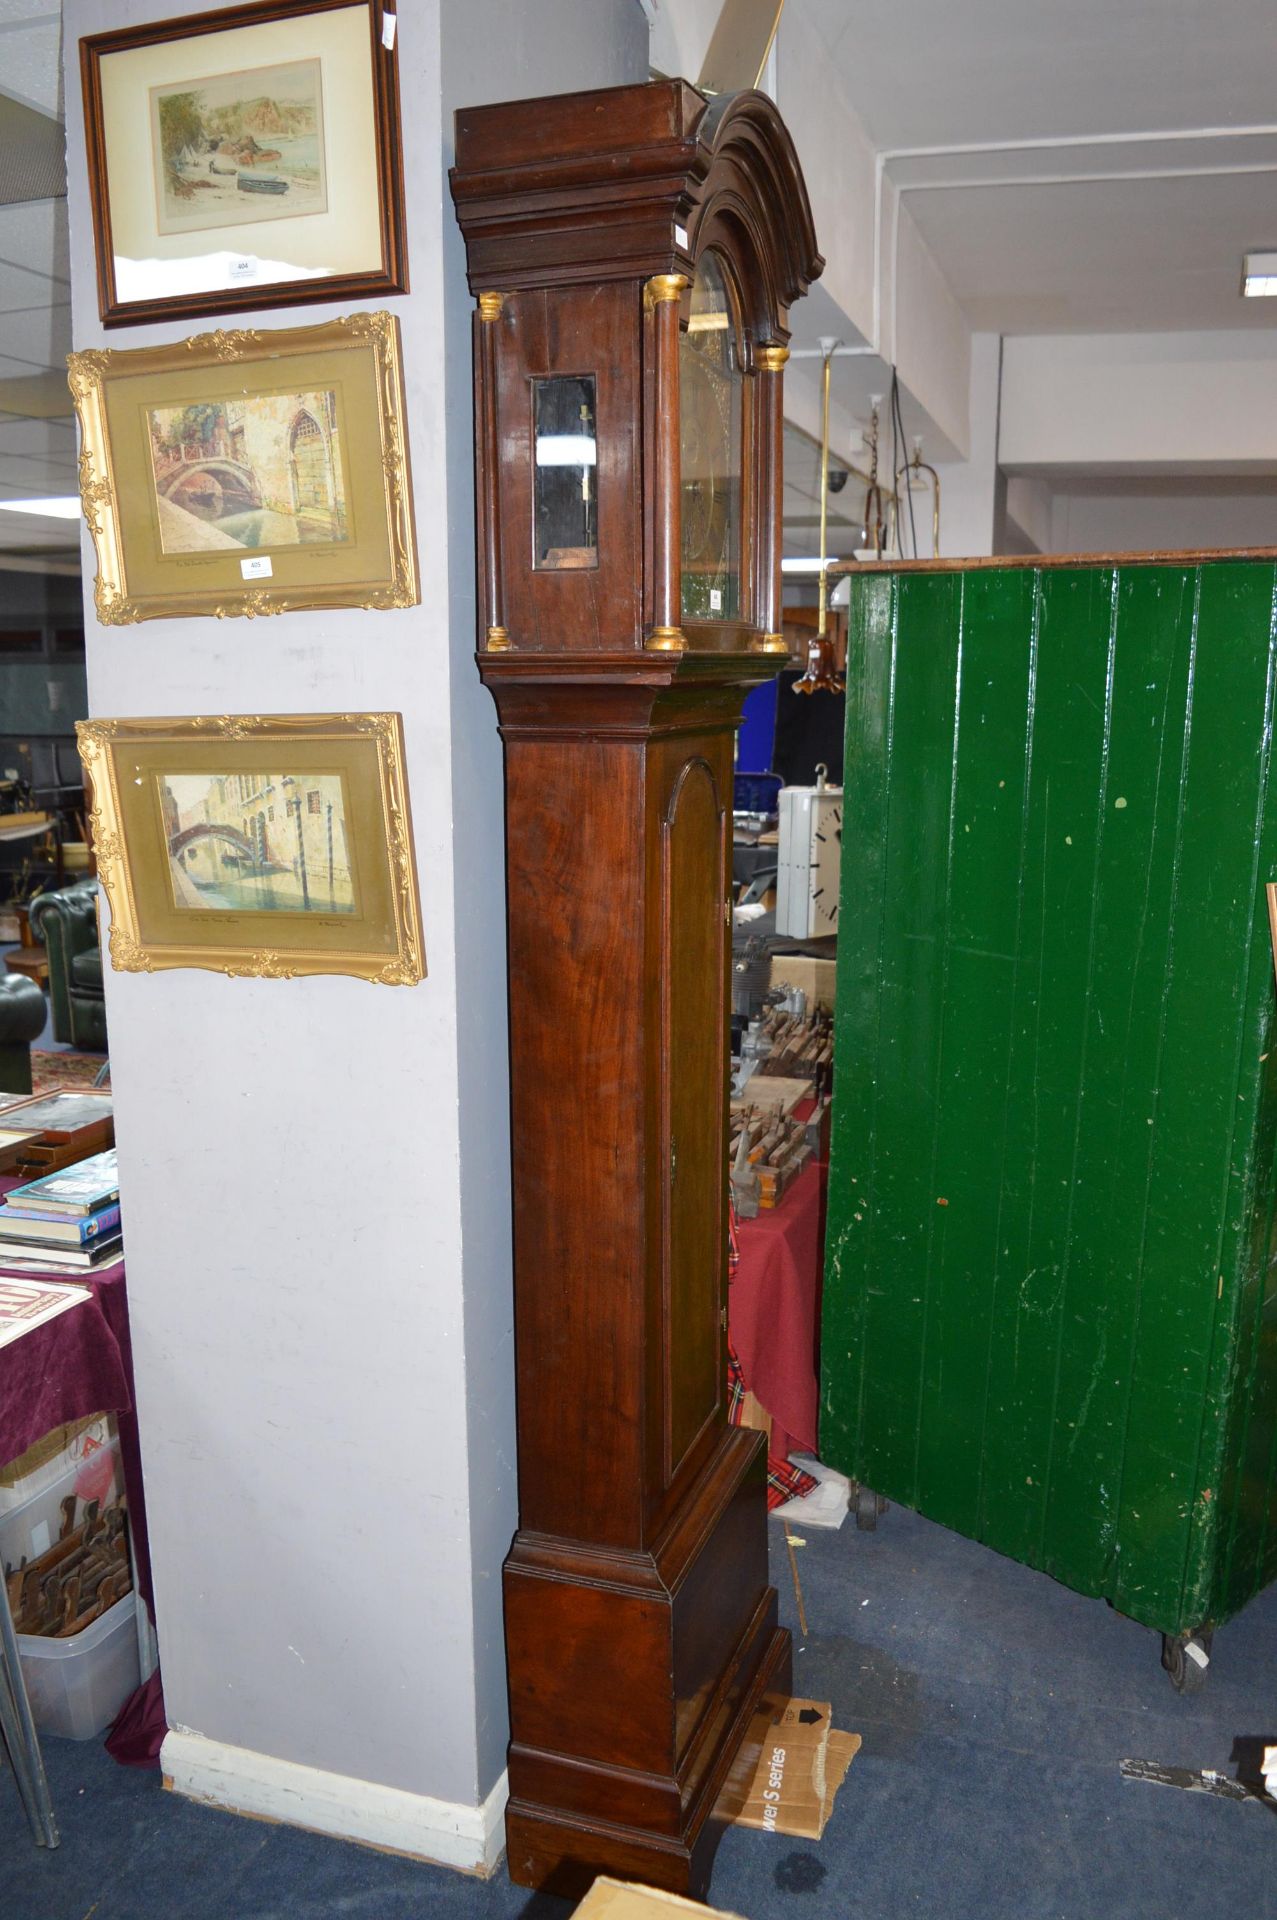 Victorian Long Cased Clock with Brass Face and Mahogany Case by Richard Smith of Newport - Image 3 of 4